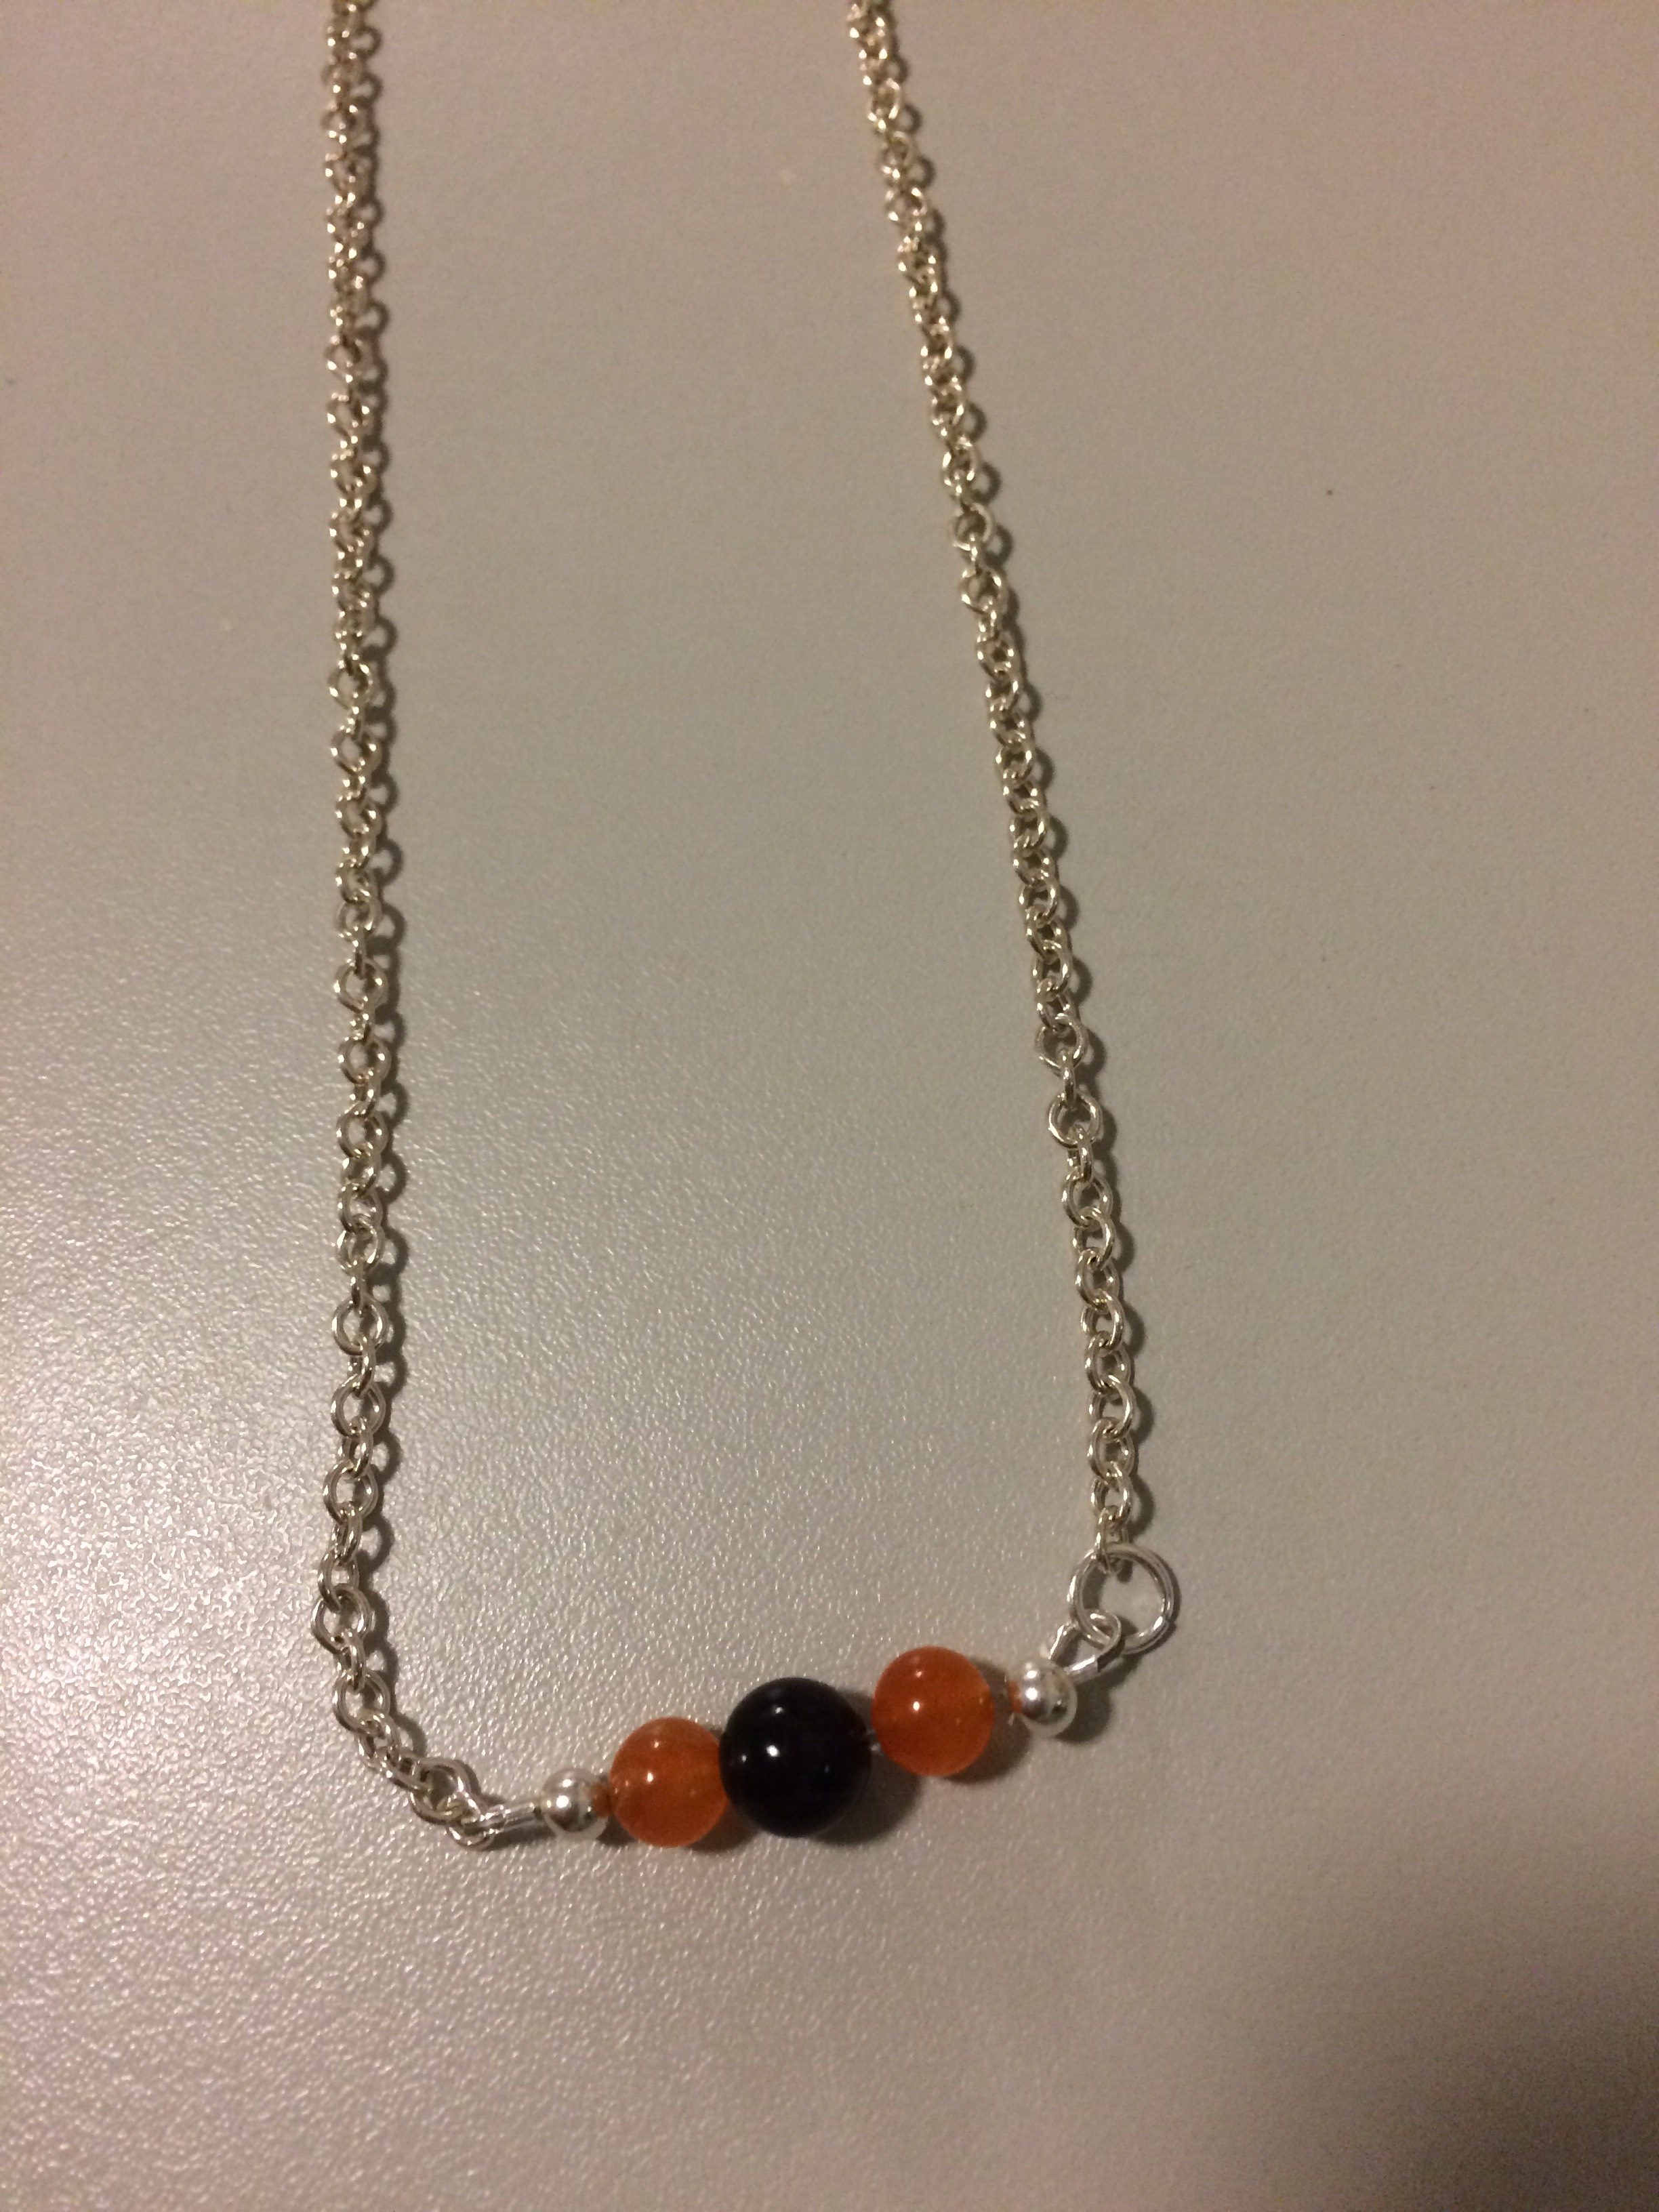 Amethyst and Carnelian Necklace with Sterling Silver adjustable Chain